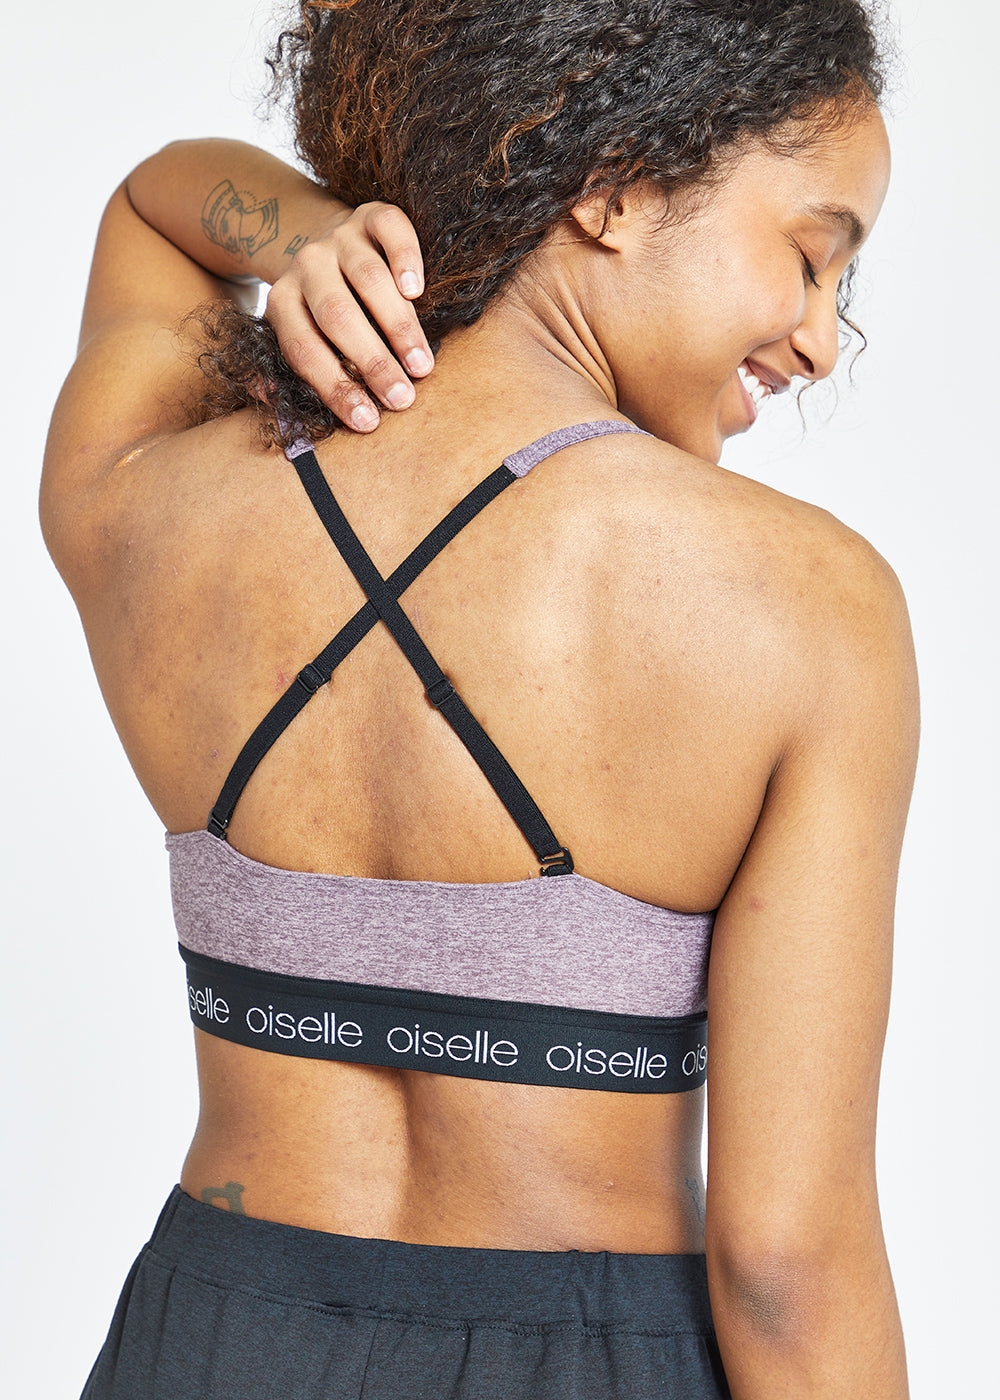 THE ONLY BRA YOU'LL EVER NEED! 😍 The Lorna Jane Compress